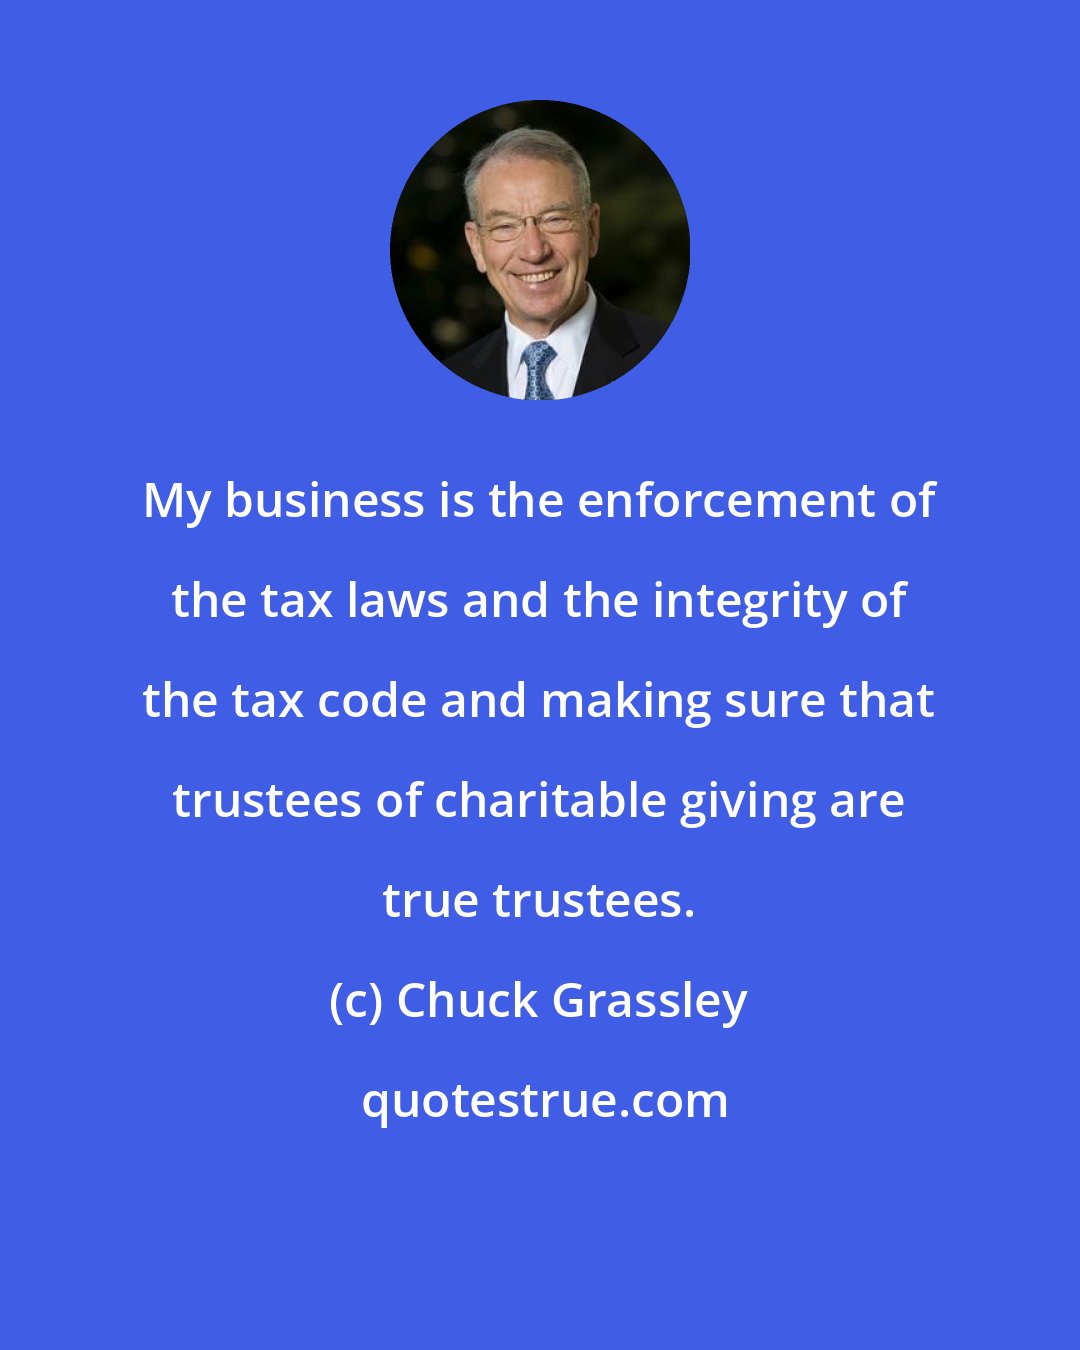 Chuck Grassley: My business is the enforcement of the tax laws and the integrity of the tax code and making sure that trustees of charitable giving are true trustees.